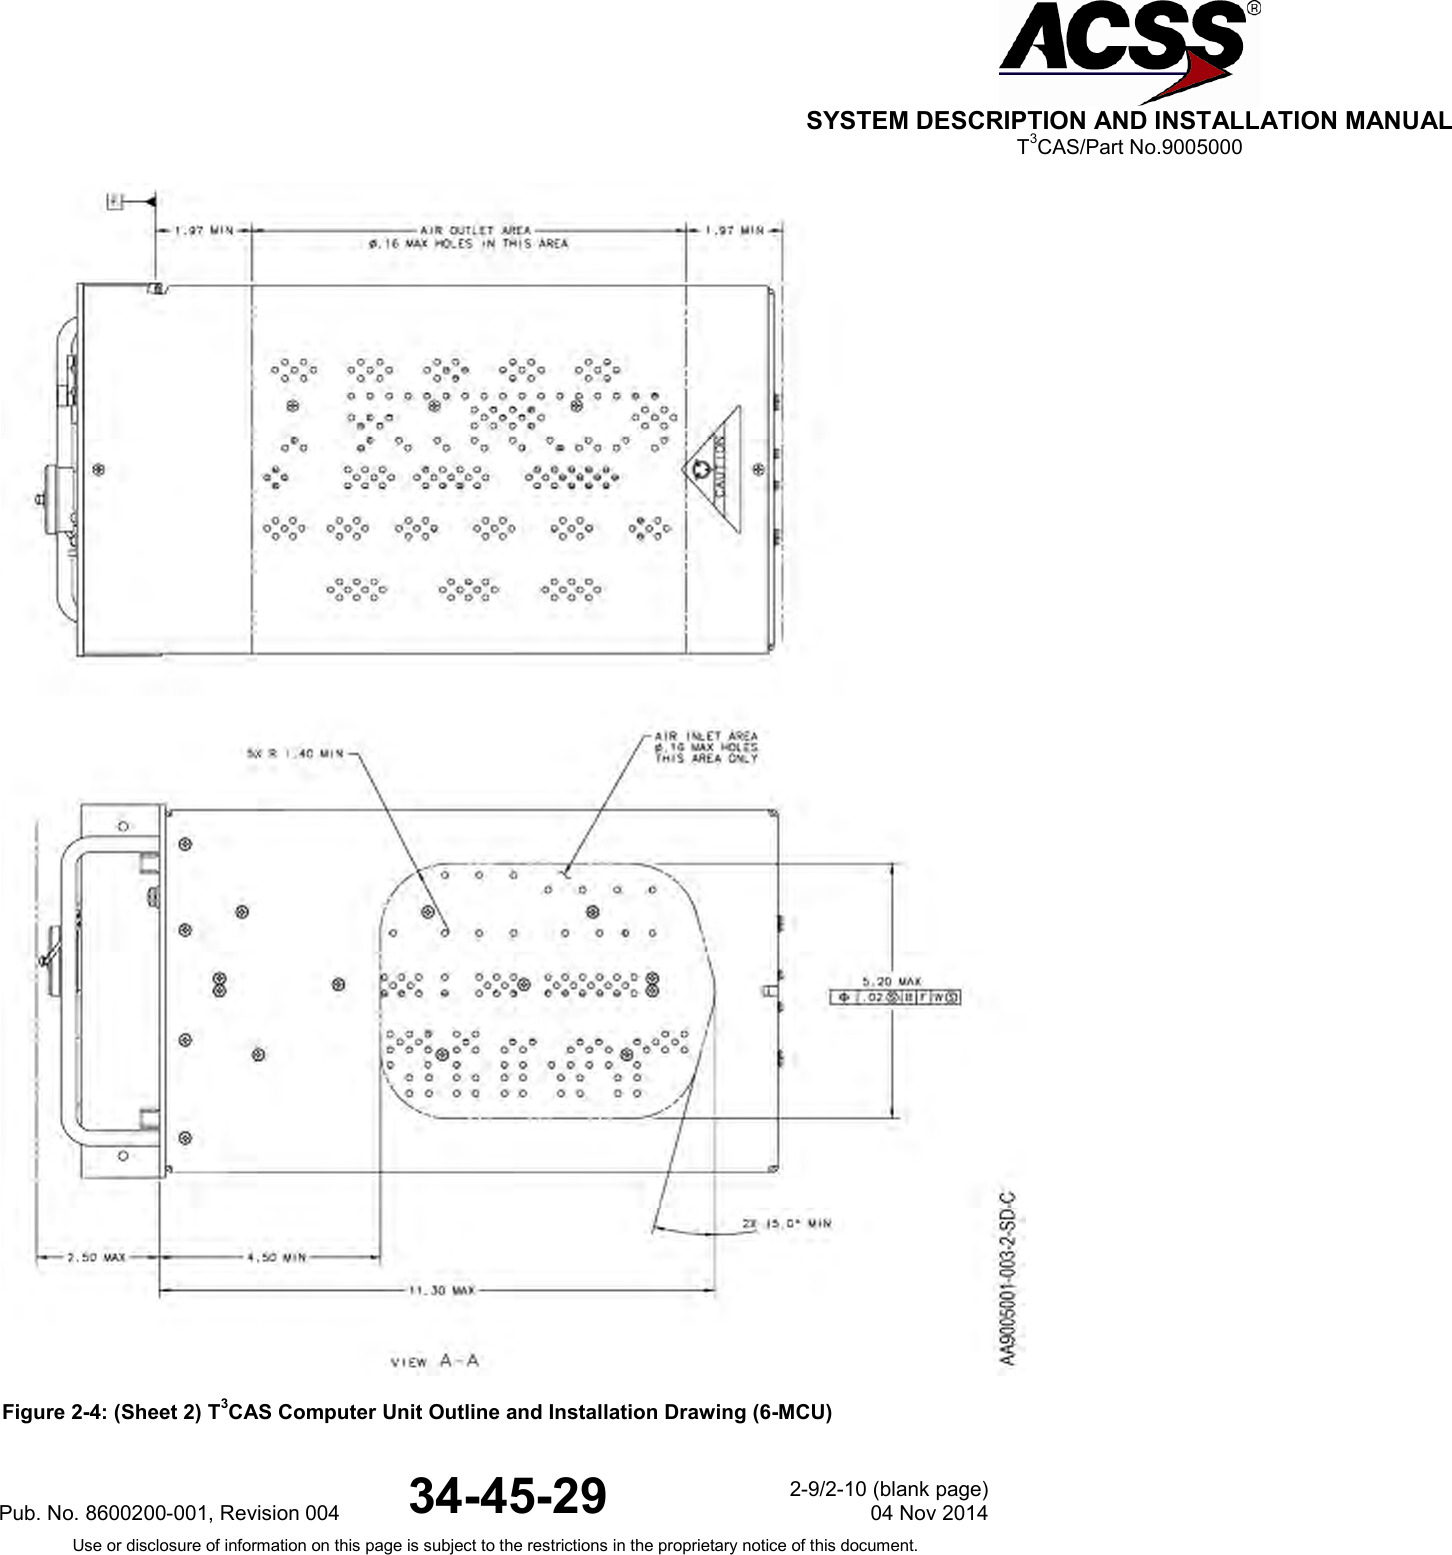  SYSTEM DESCRIPTION AND INSTALLATION MANUAL T3CAS/Part No.9005000  Figure 2-4: (Sheet 2) T3CAS Computer Unit Outline and Installation Drawing (6-MCU) Pub. No. 8600200-001, Revision 004 34-45-29 2-9/2-10 (blank page) 04 Nov 2014 Use or disclosure of information on this page is subject to the restrictions in the proprietary notice of this document.  